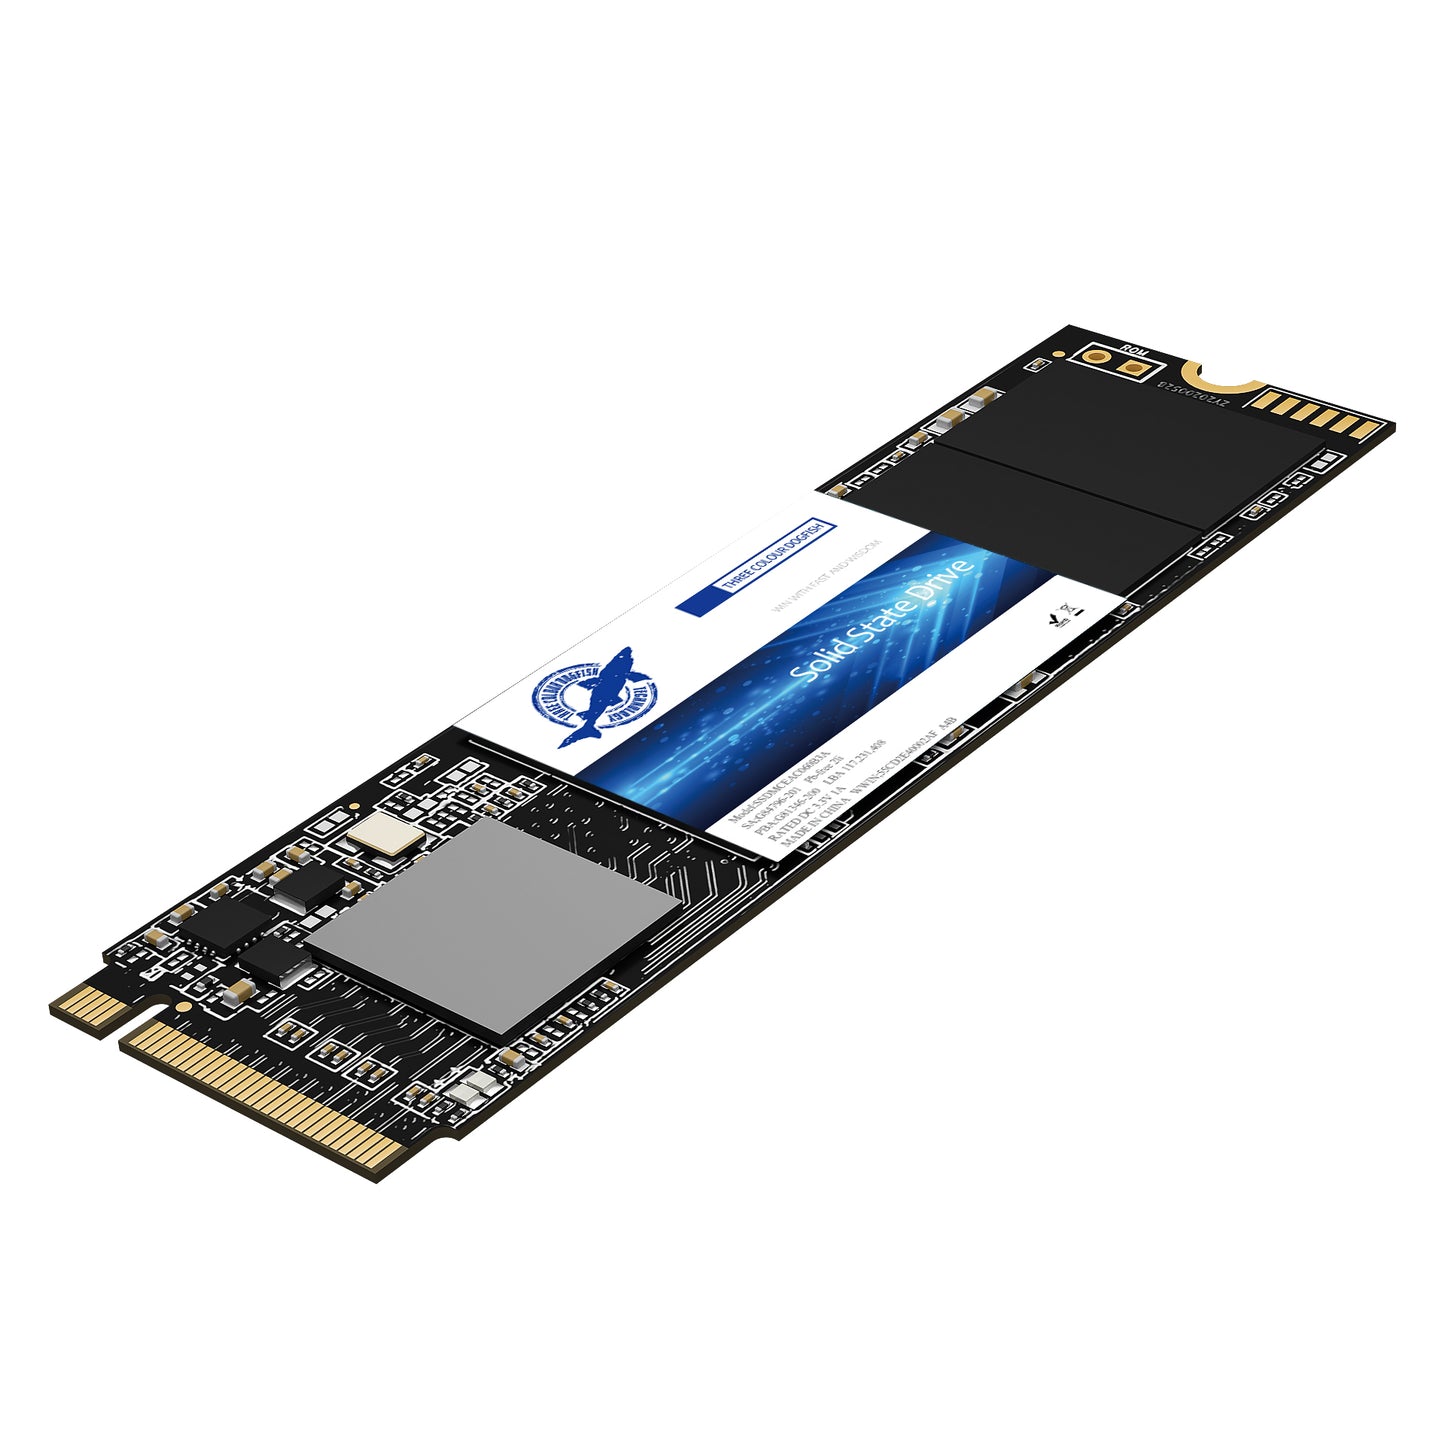 Dogfish PCIe NVMe 3.0 SSD  Internal Solid State Drive Gen3x4